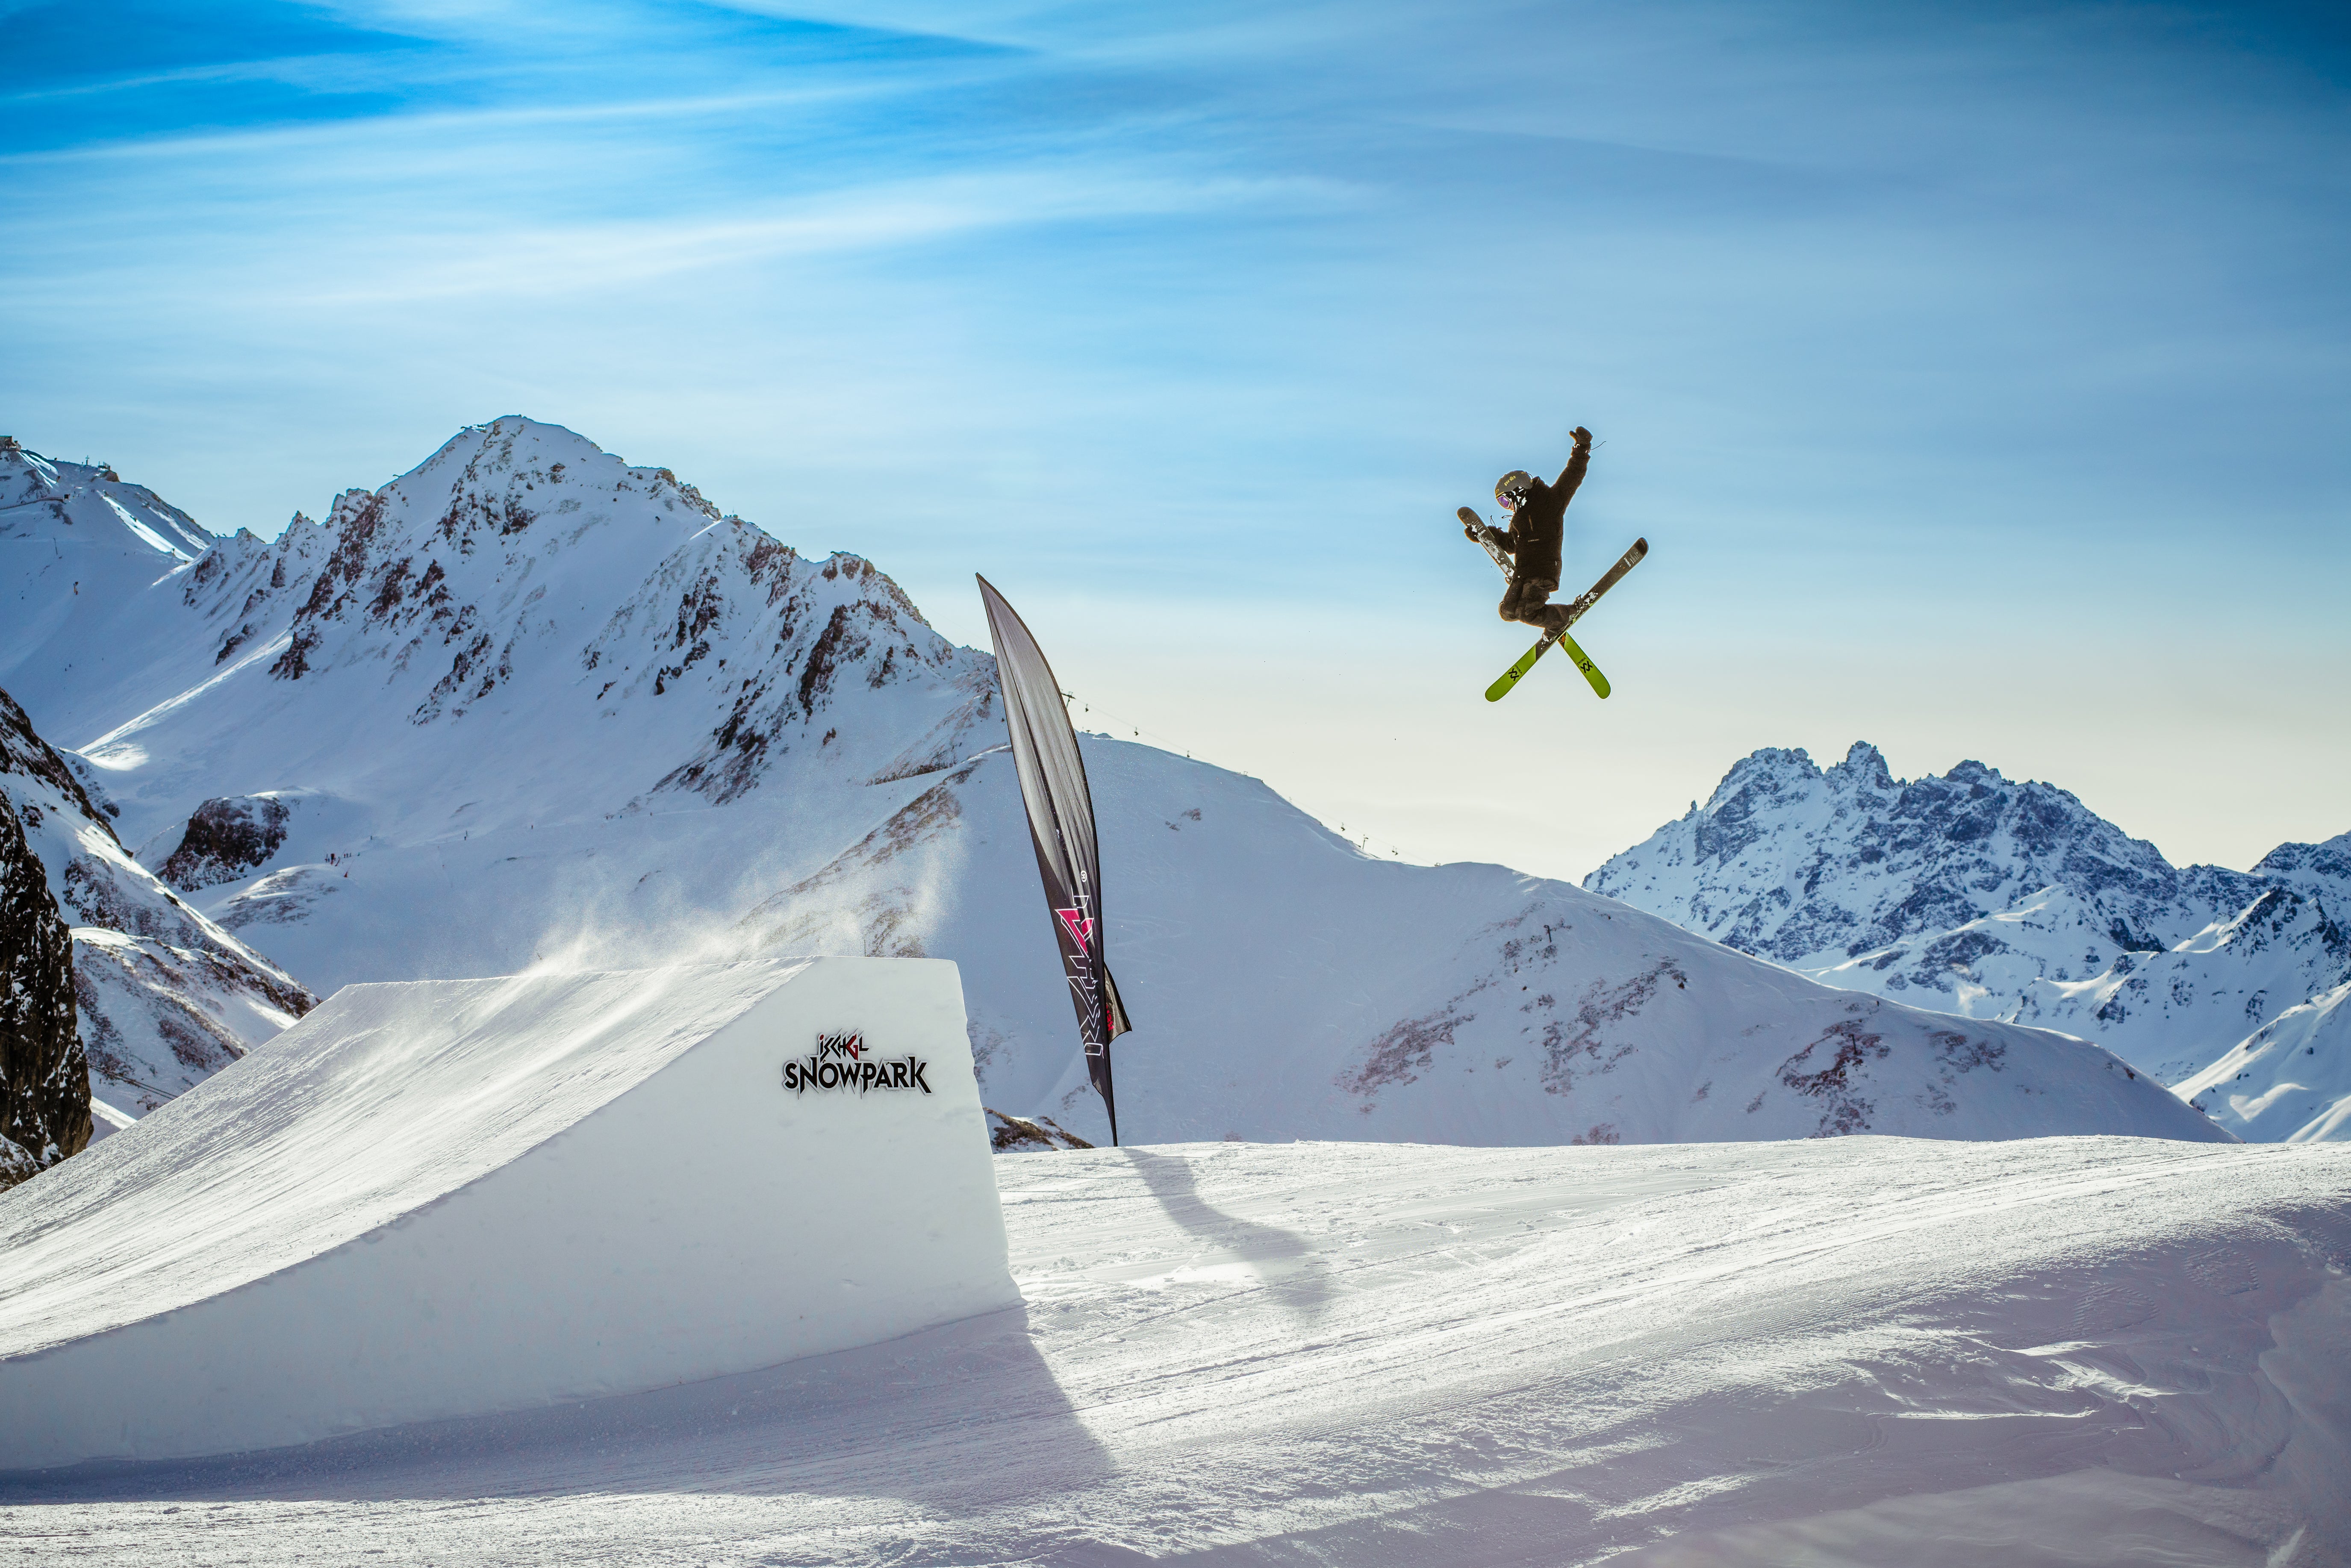 Skiers and snowboarders alike can enjoy the obstacles at Ischgl Snow Park